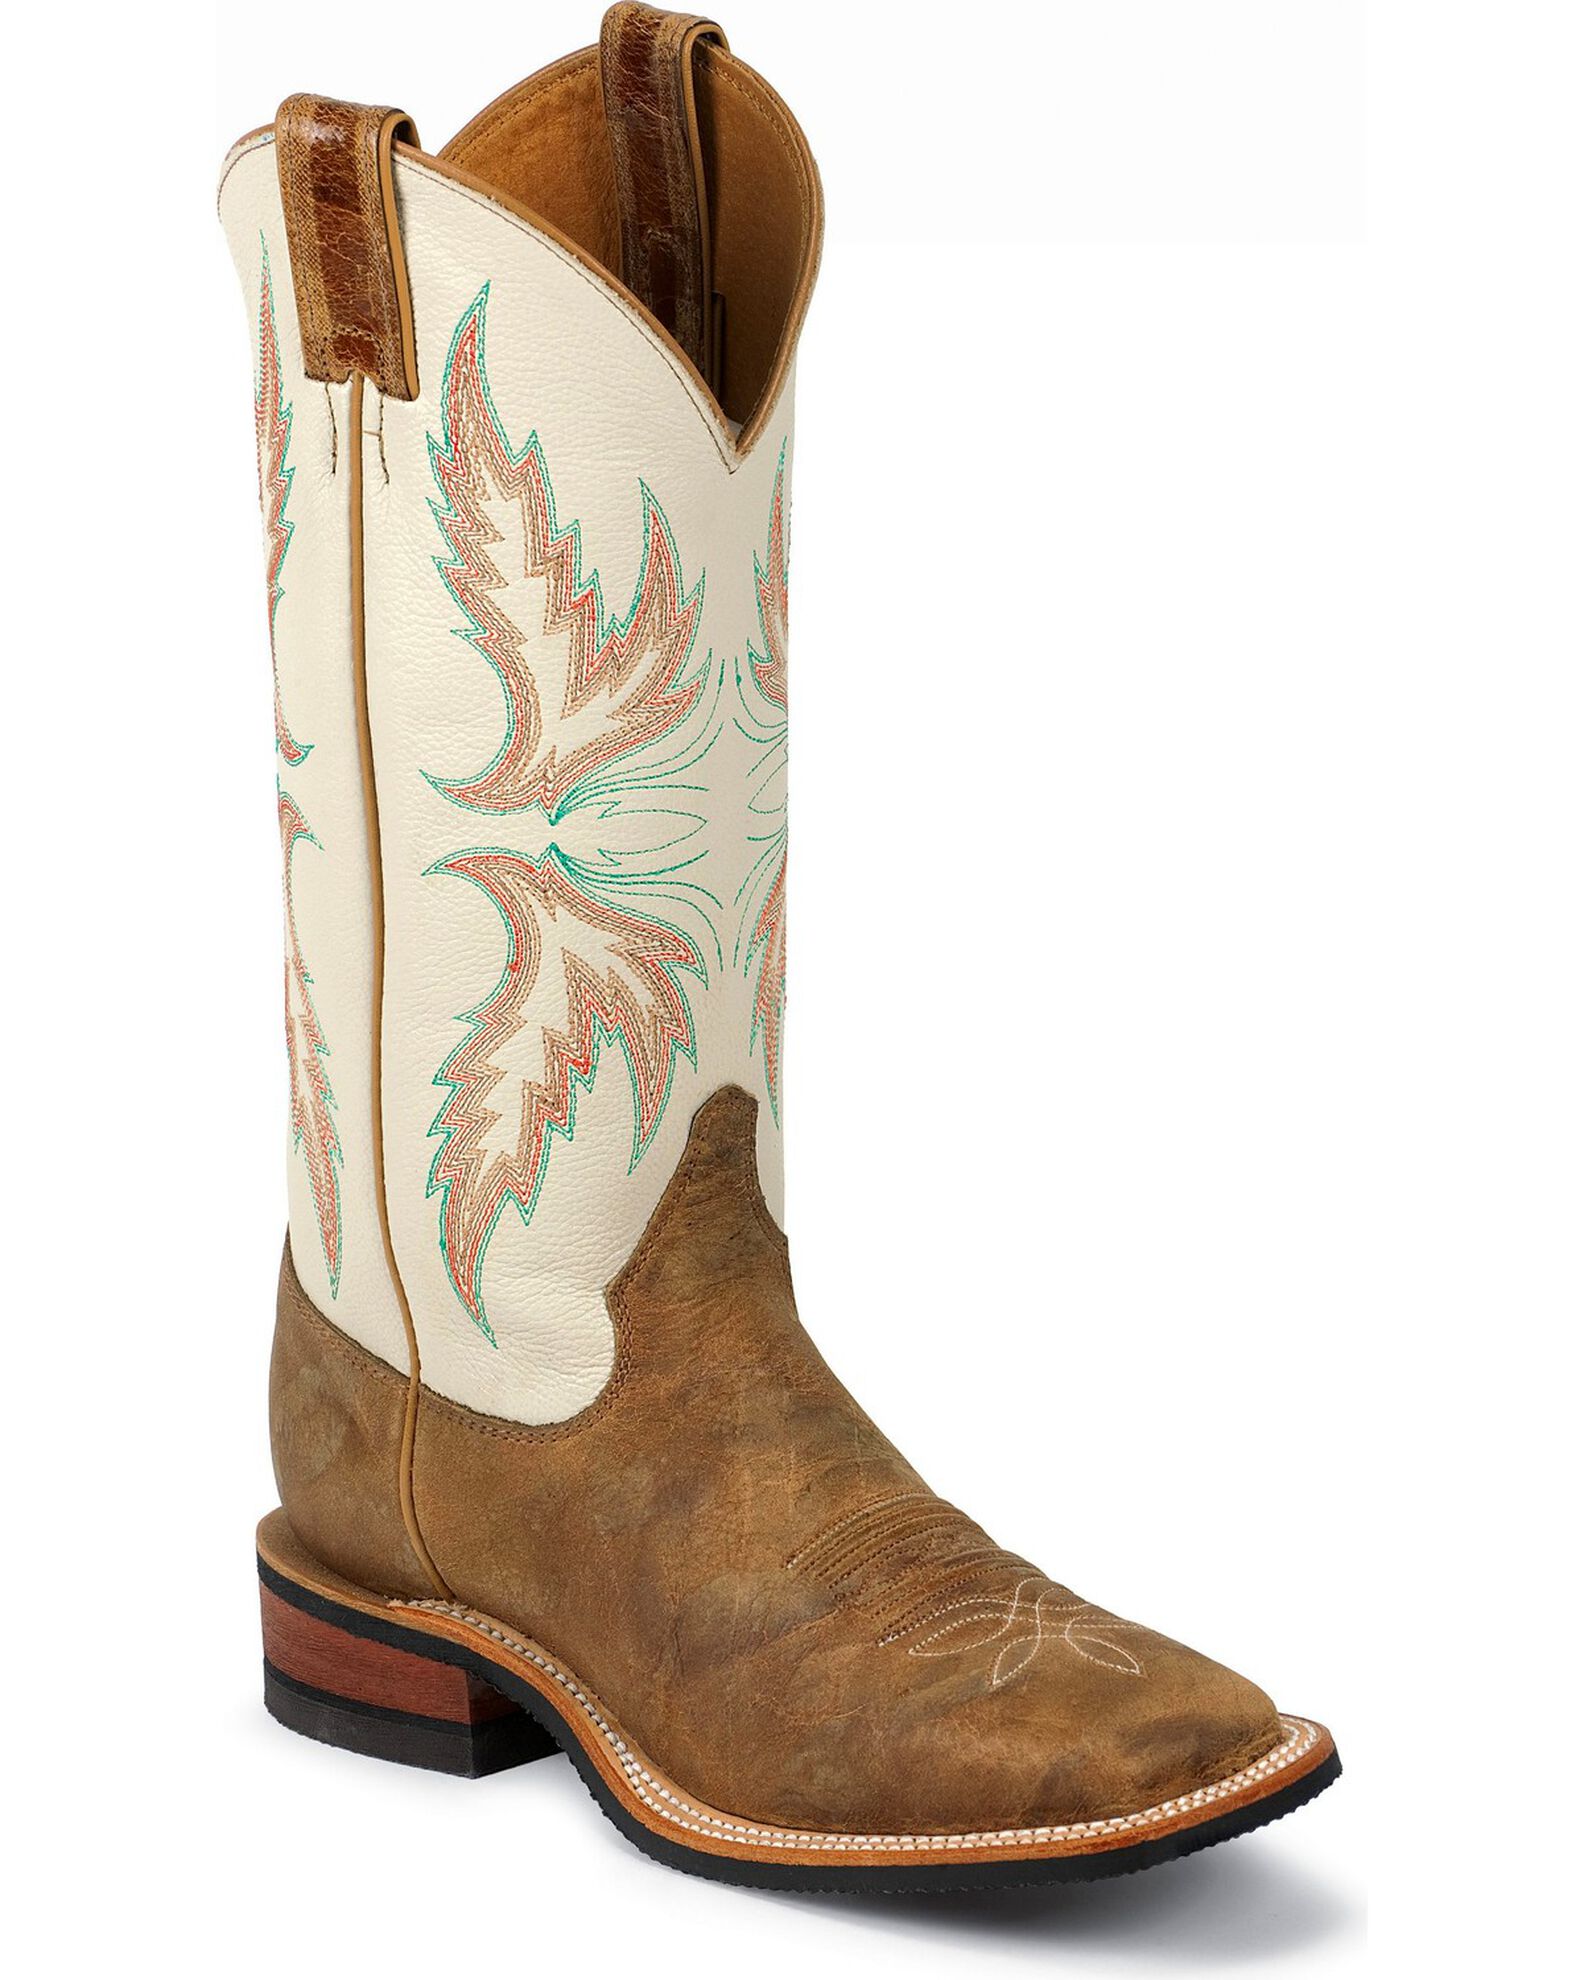 Boot Barn on X: New styles, just in time for fall. #boots #cowboyboots  #cowgirlboots #ariat #justin #bootbarn #cowboyup #cowboy #cowboystyle  #countrylife #westernlifestyle  / X